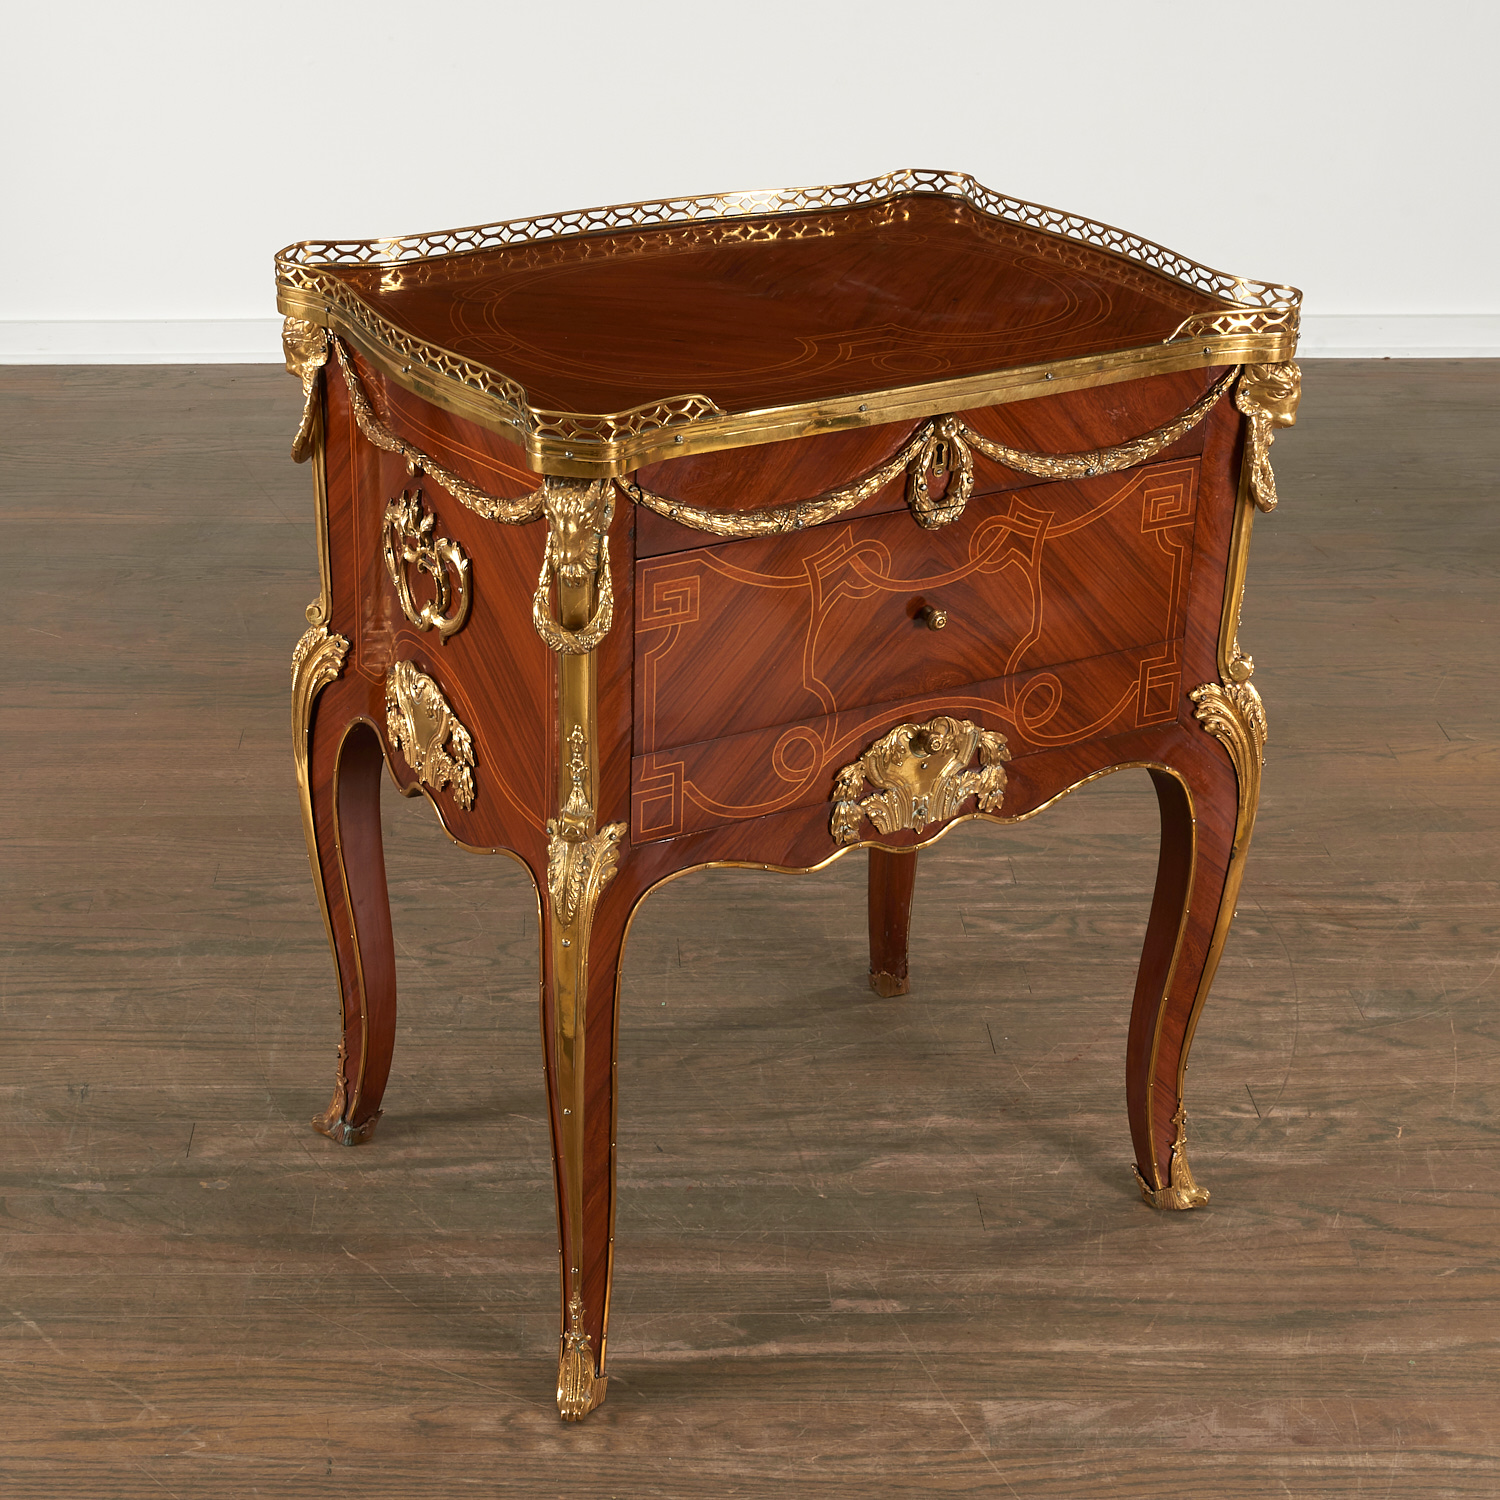 LOUIS XV XVI STYLE PARQUETRY TABLE 36284a